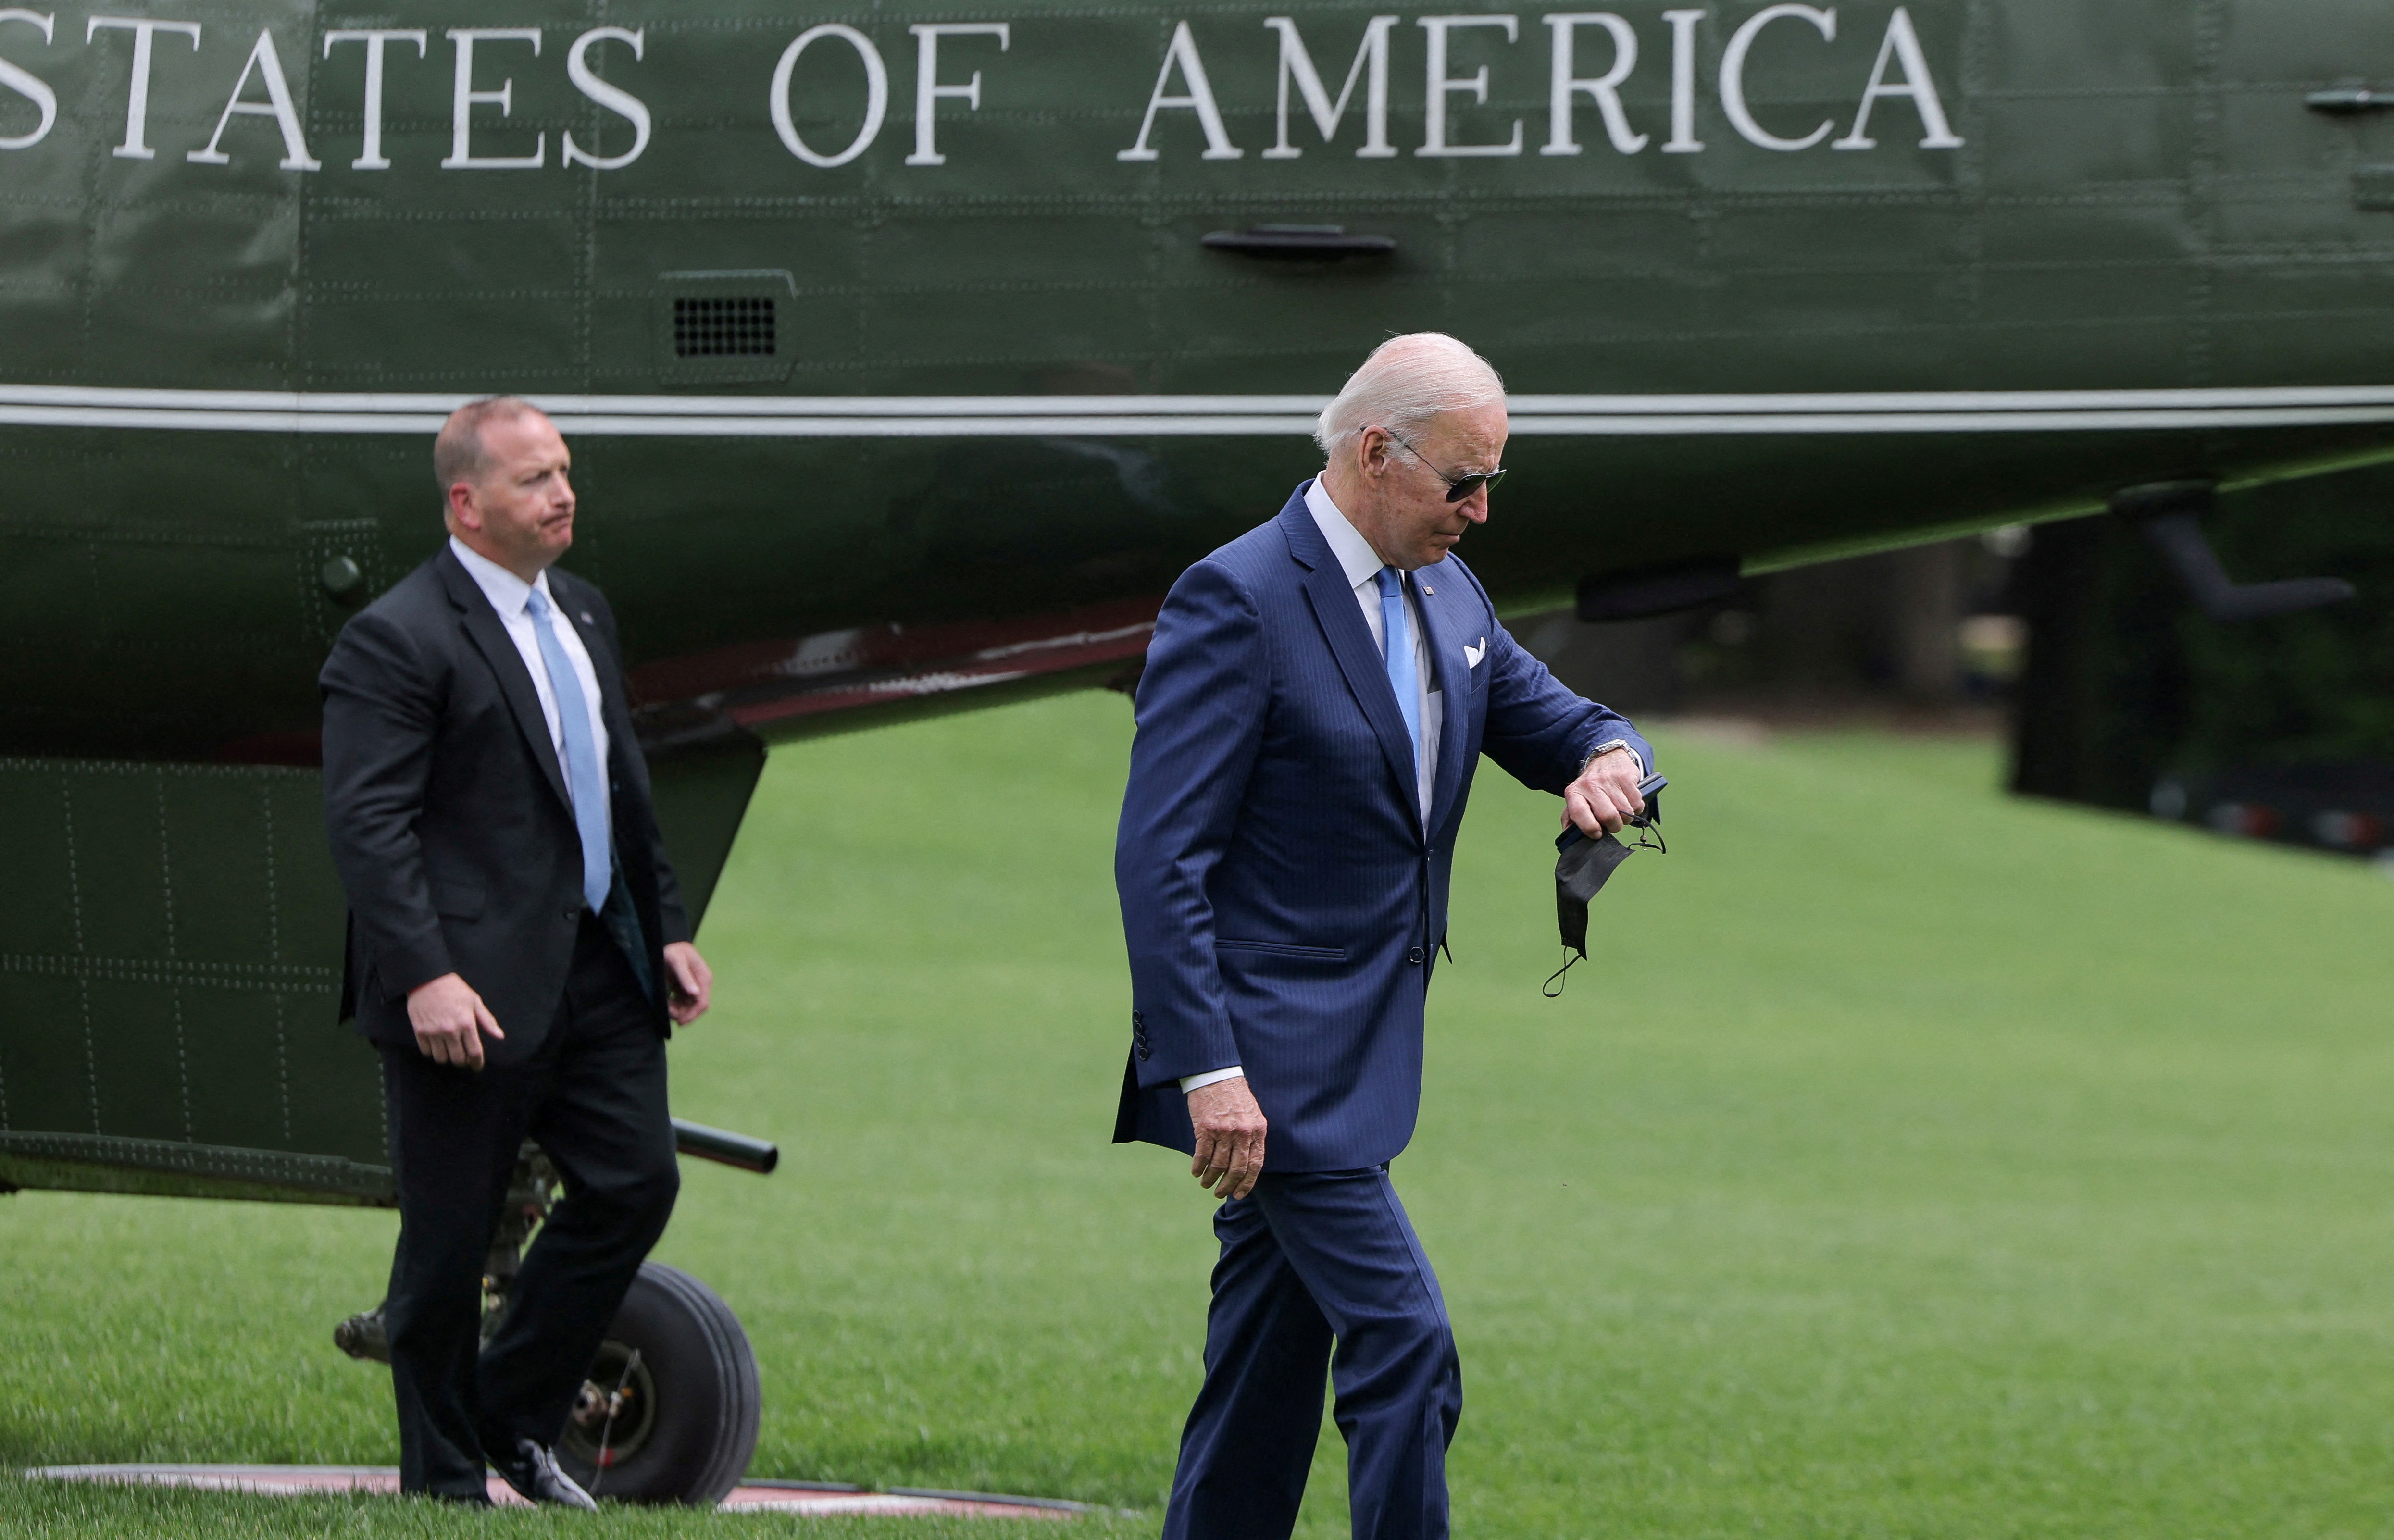 U.S. President Joe Biden checks his watch after arriving at the White House following an interagency briefing on hurricane preparedness at Joint Base Andrews